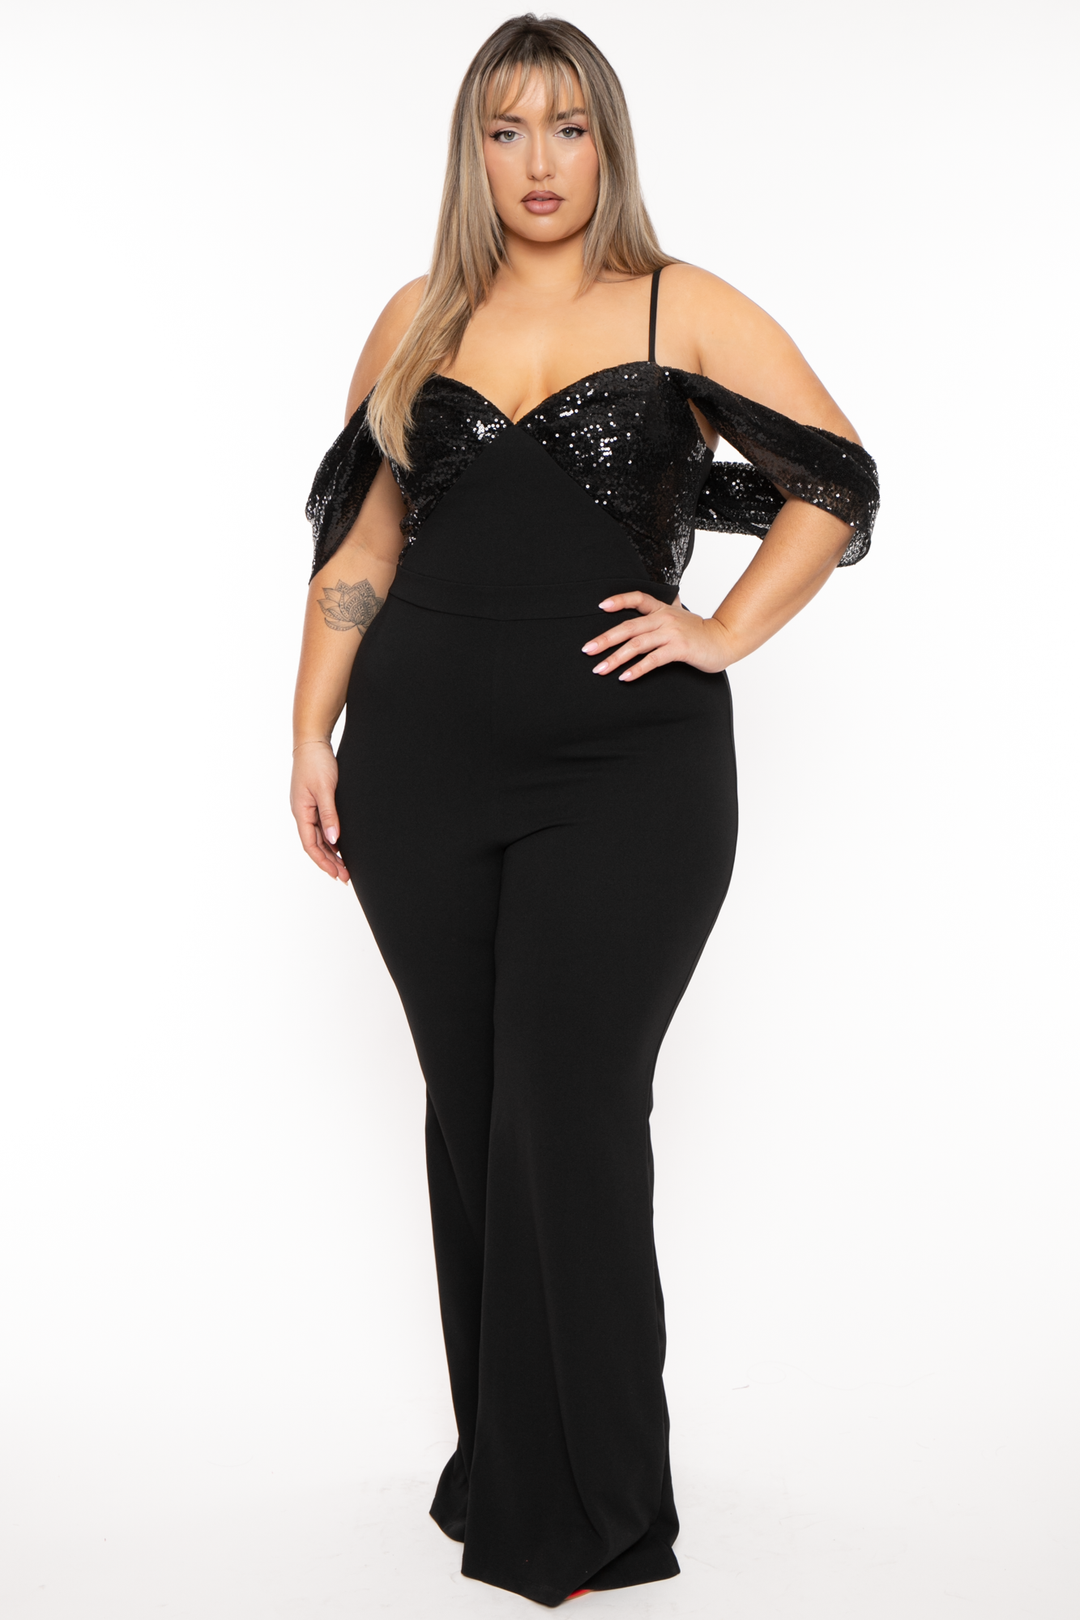 Curvy Sense - 🖤🖤🖤 The perfect bodysuit for your adventures..  @awholenewworldwithjazzy 👄💃🏾🔥 Shop our LACE INSET CUTOUT BODYSUIT &  save 40% with discount code SUN40 🌞 #curvysense #curvysensedoll  #plussizefashion #curvygirl #curvystyle